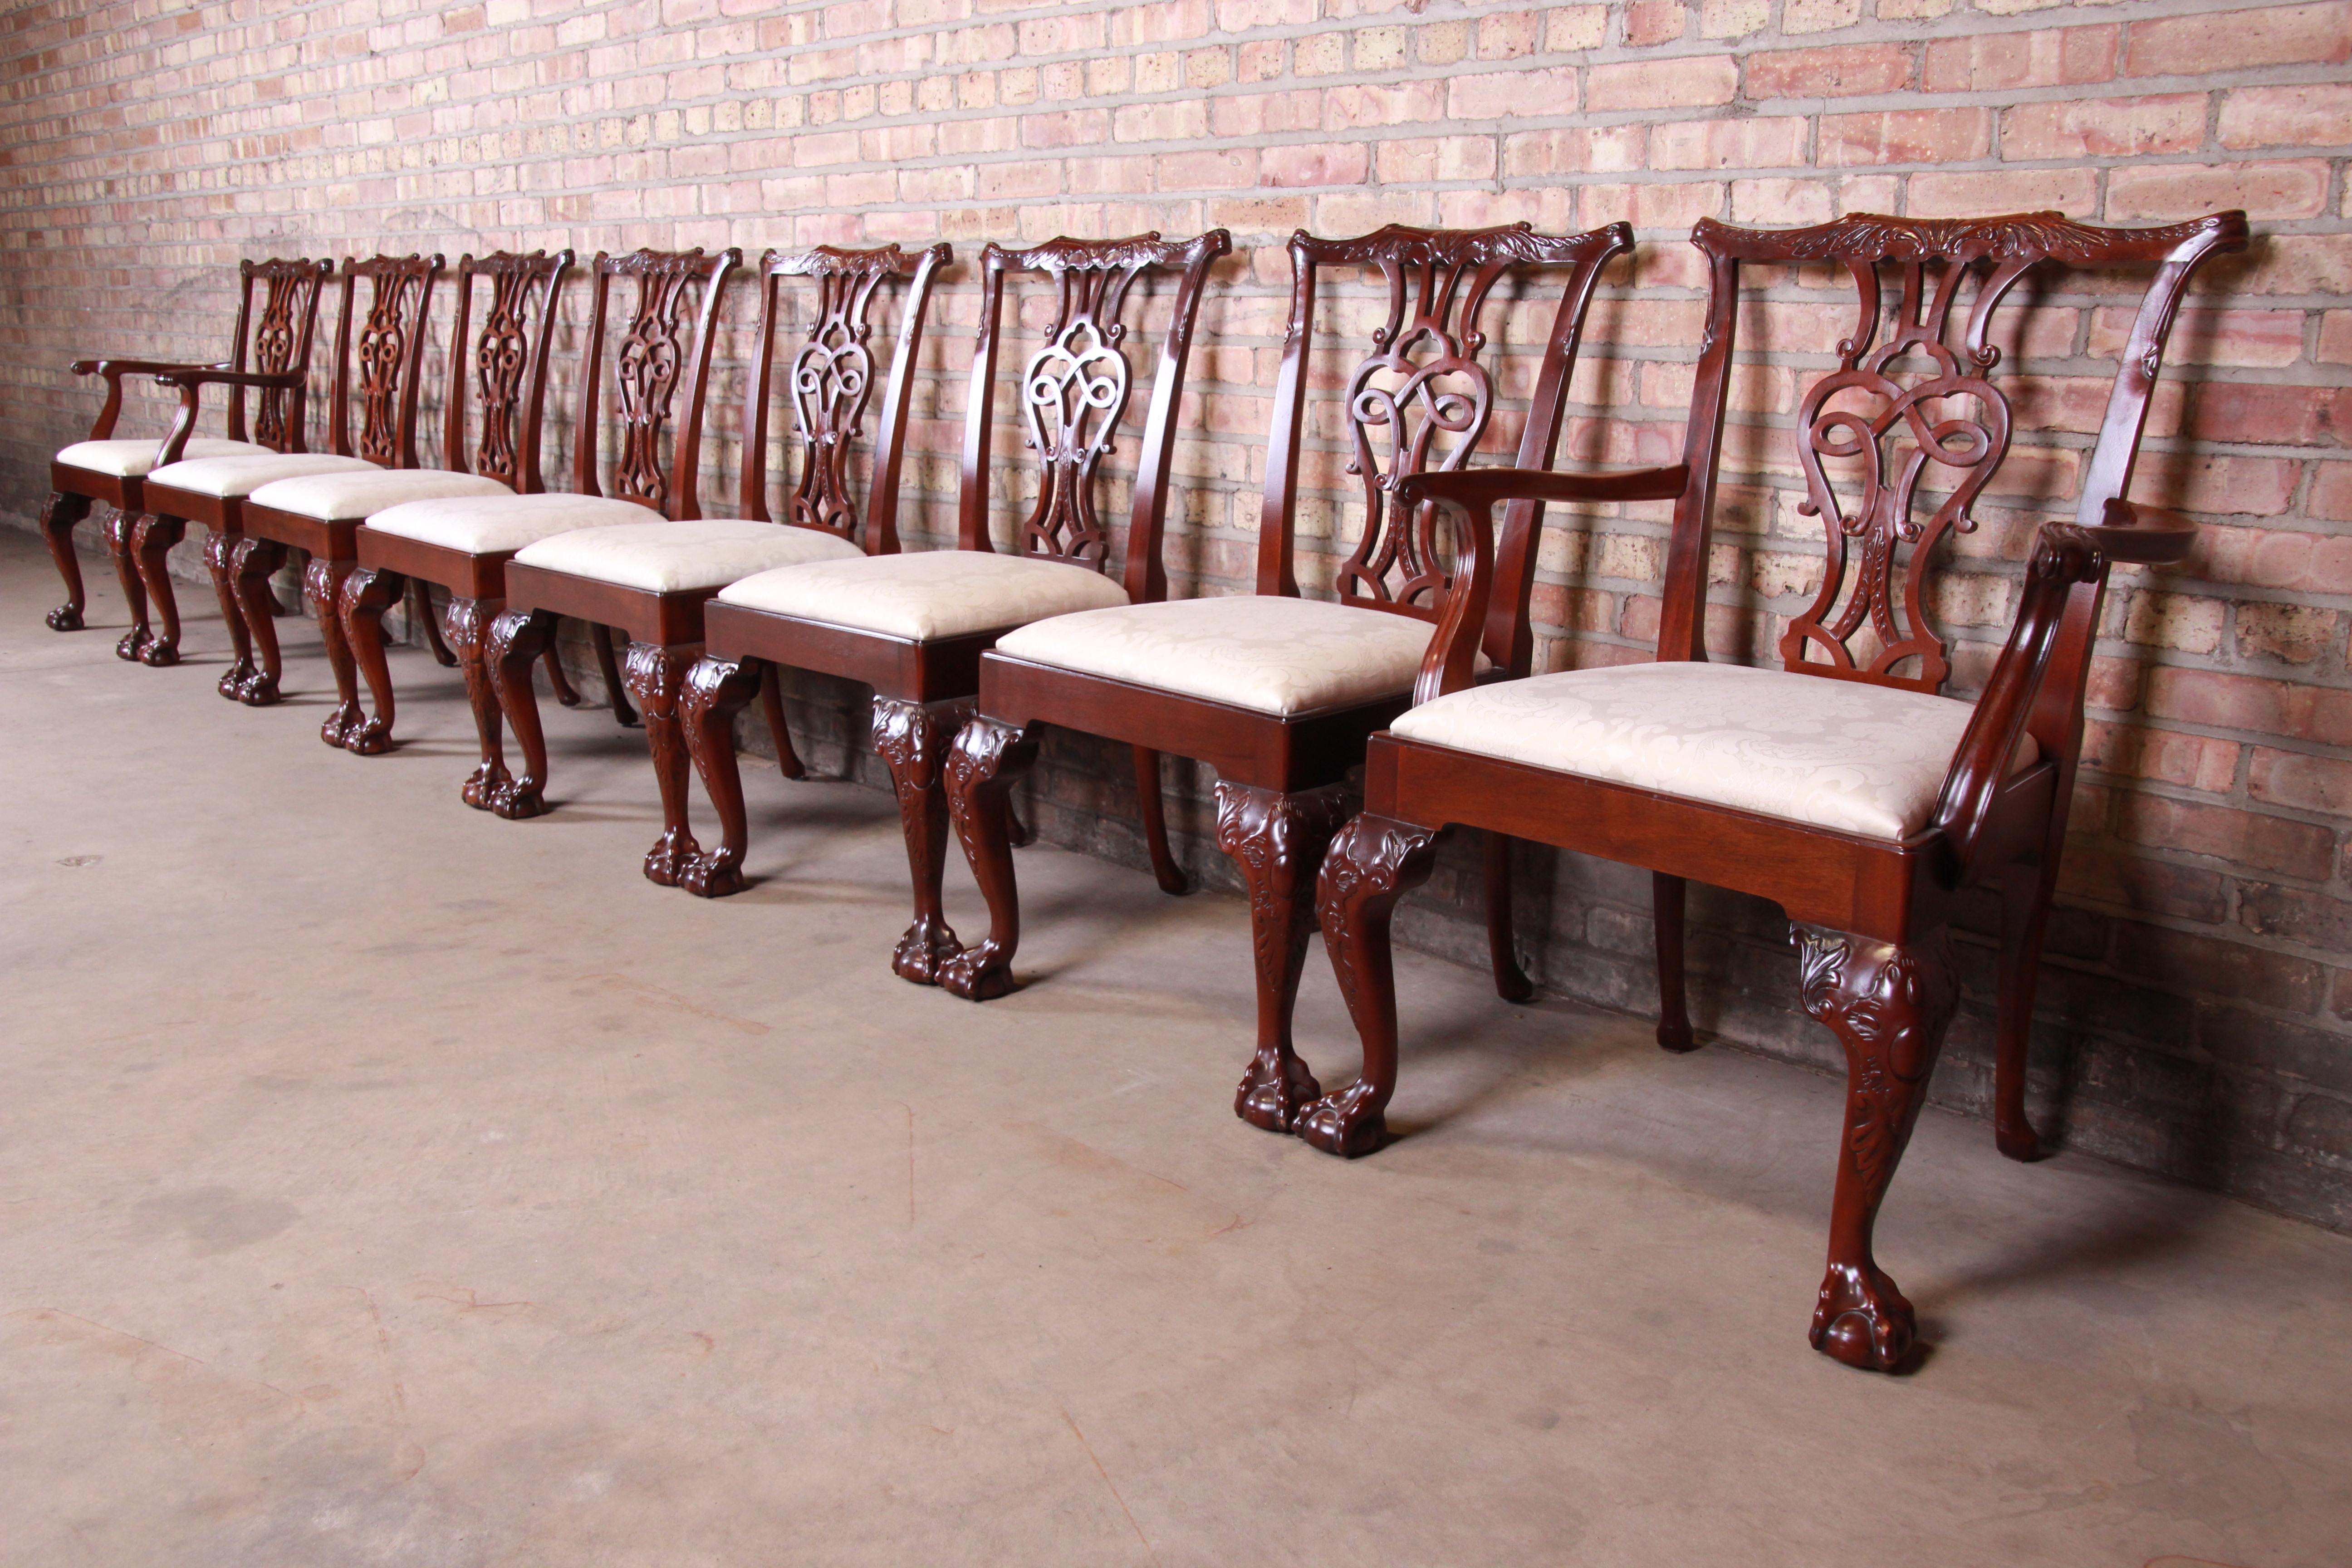 A rare and exceptional set of eight fine Chippendale carved mahogany dining chairs from the exclusive Stately Homes Collection by Baker Furniture.

The set includes two open armchairs and six side chairs. The chairs feature shaped back supports